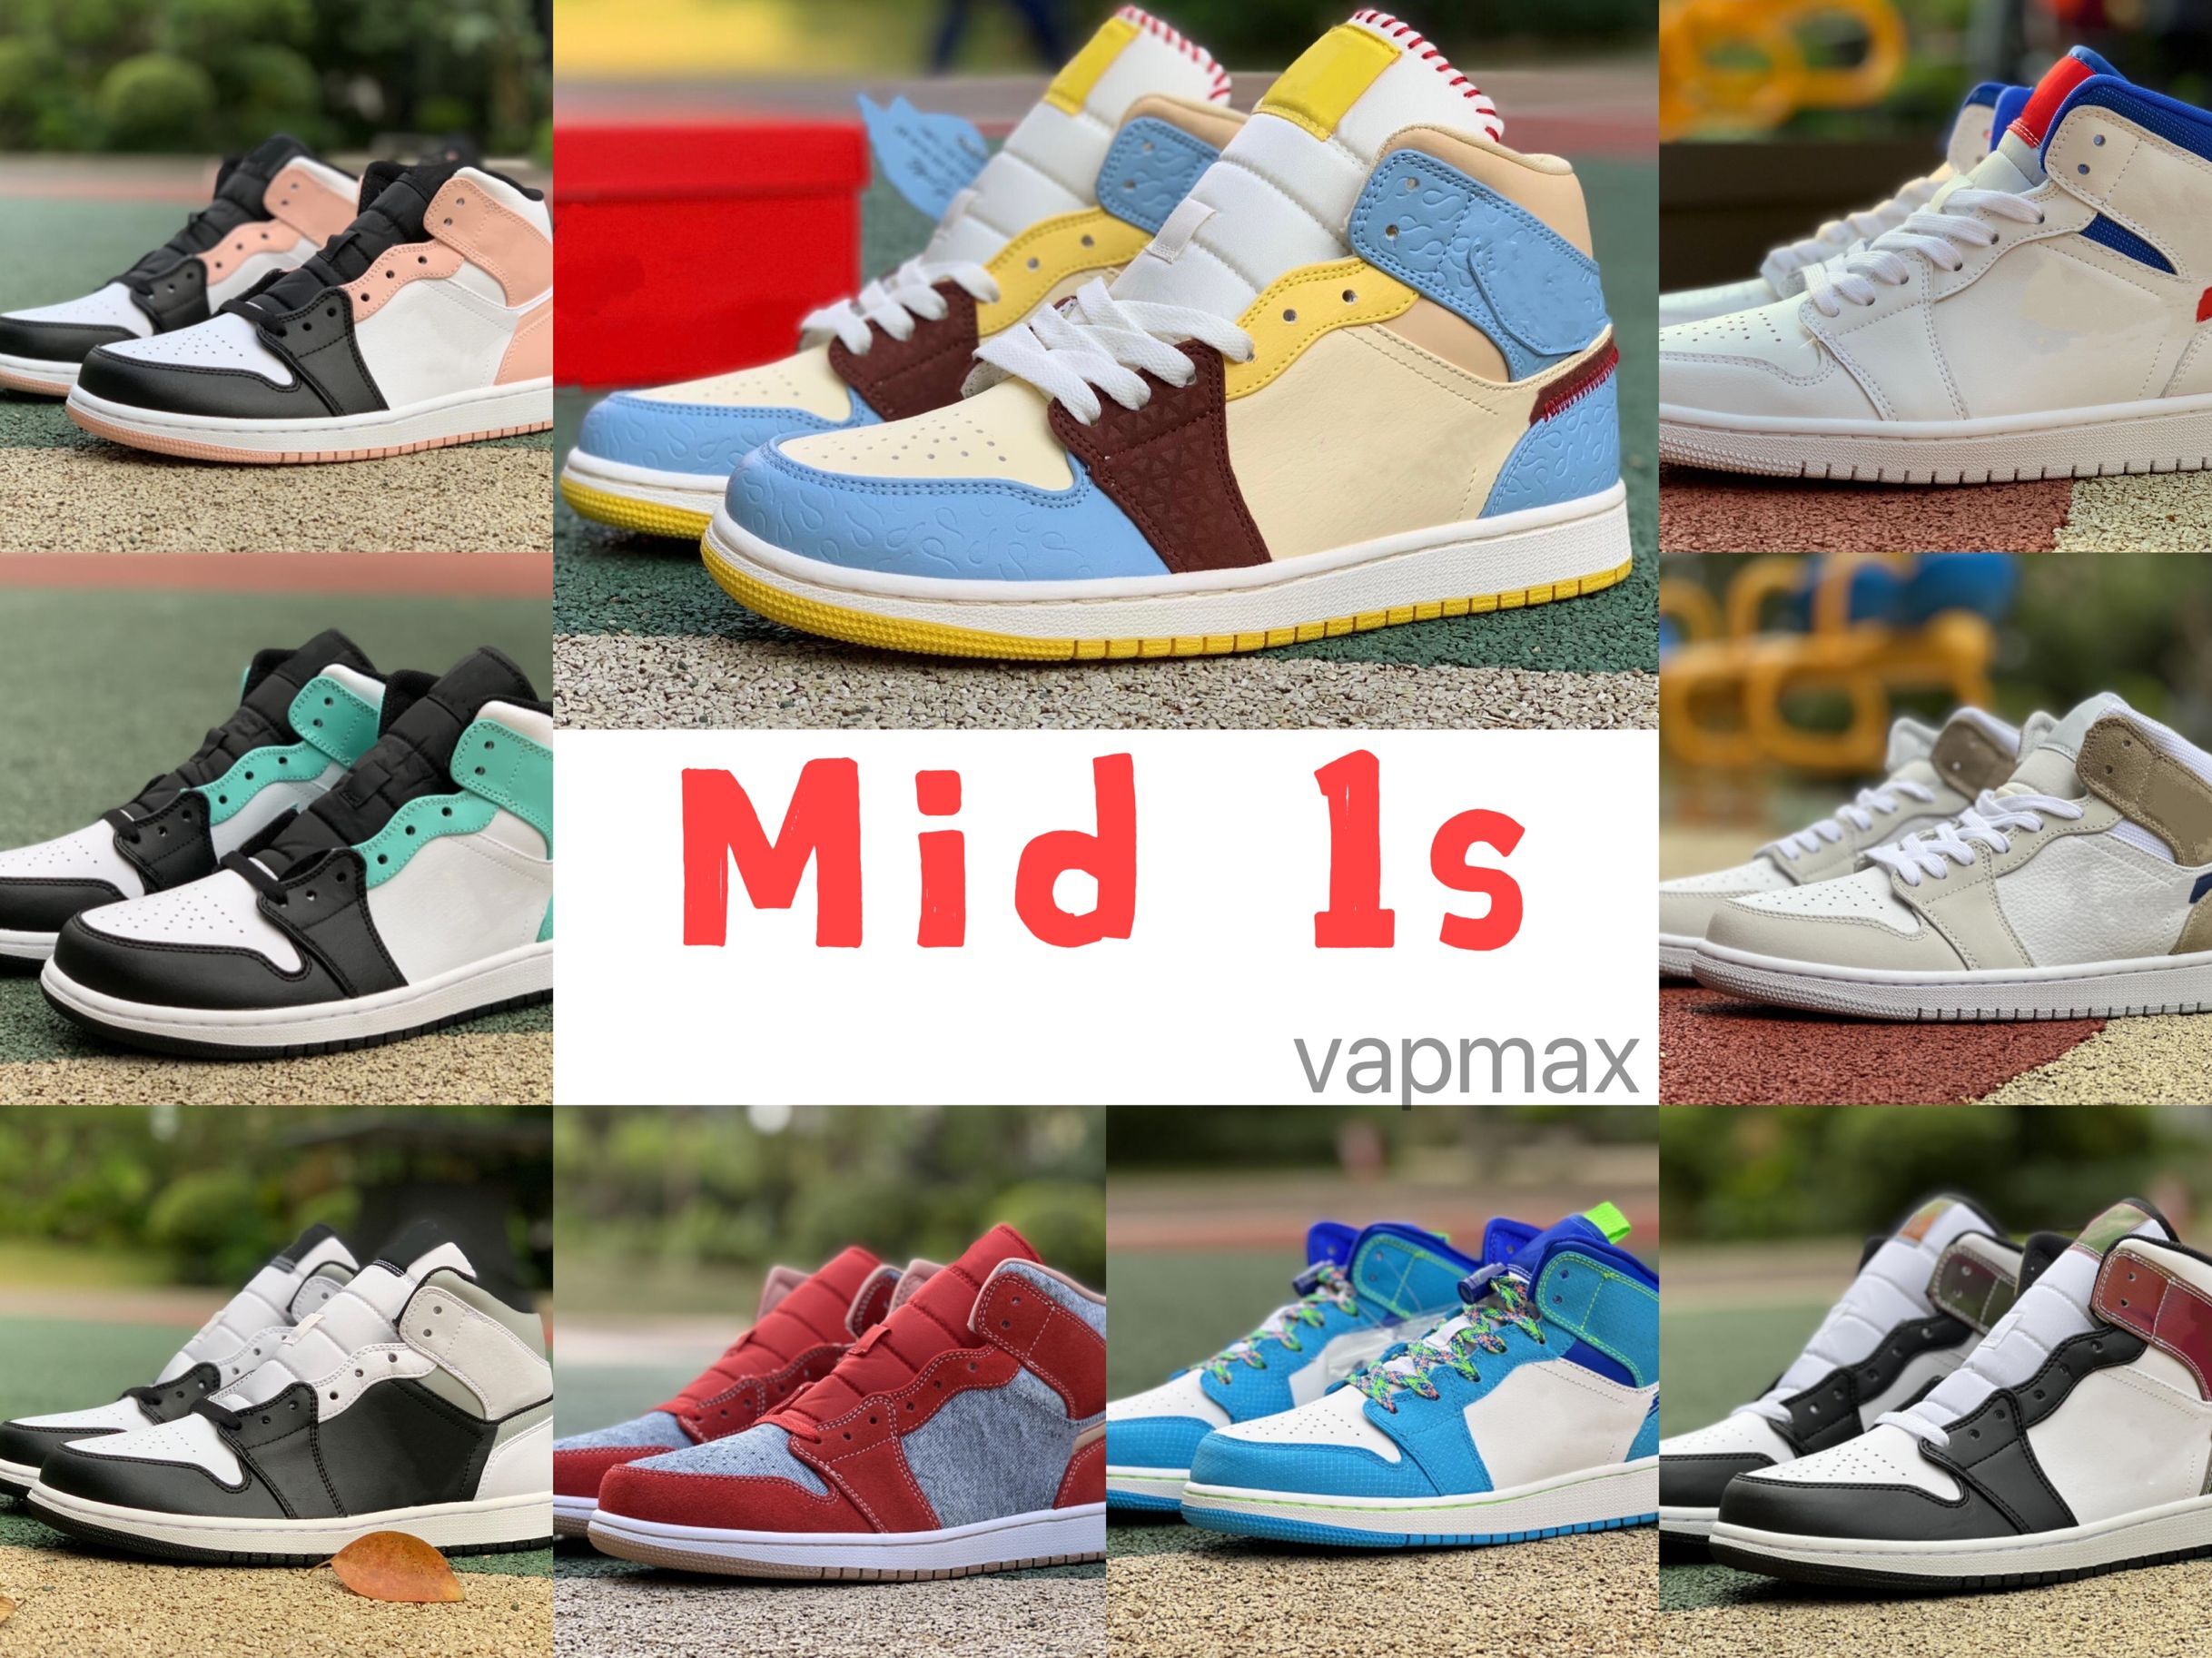 Newest Collection Mid 1s Basketball Shoes Vapmax Multicolor Crimson Tint Denim lsland green Fearless Maison Heat Reactive University red men women sports Sneakers